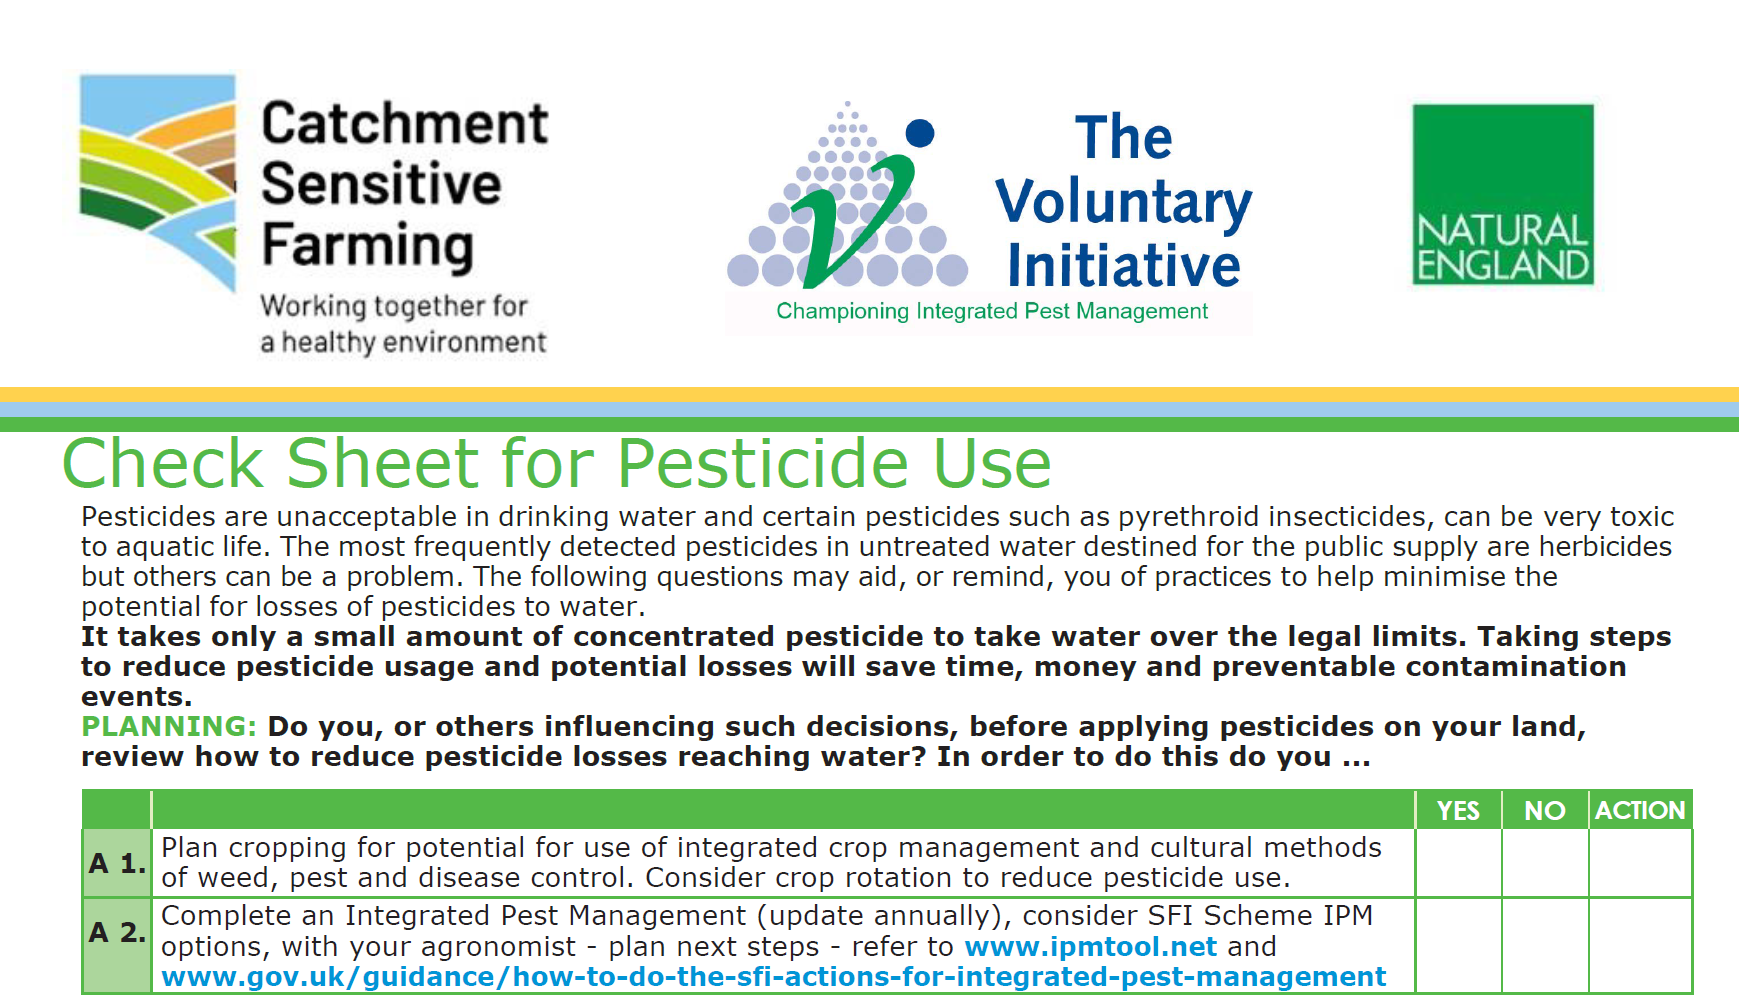 Joint CSF / VI Pesticide Check Sheet launched